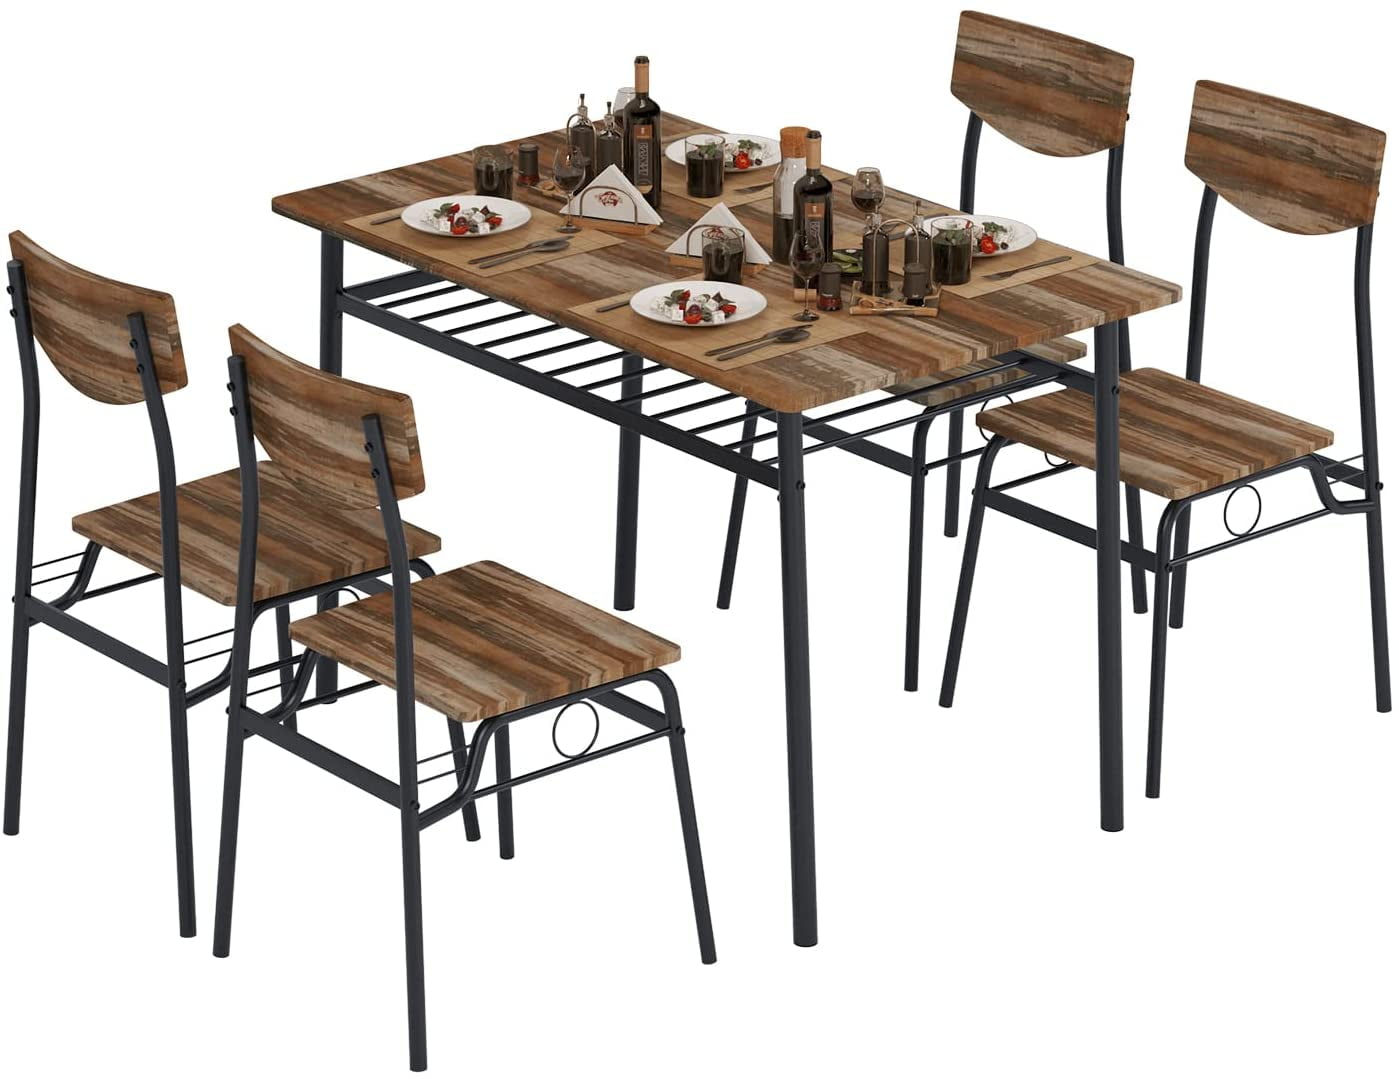 4 person kitchen table brown